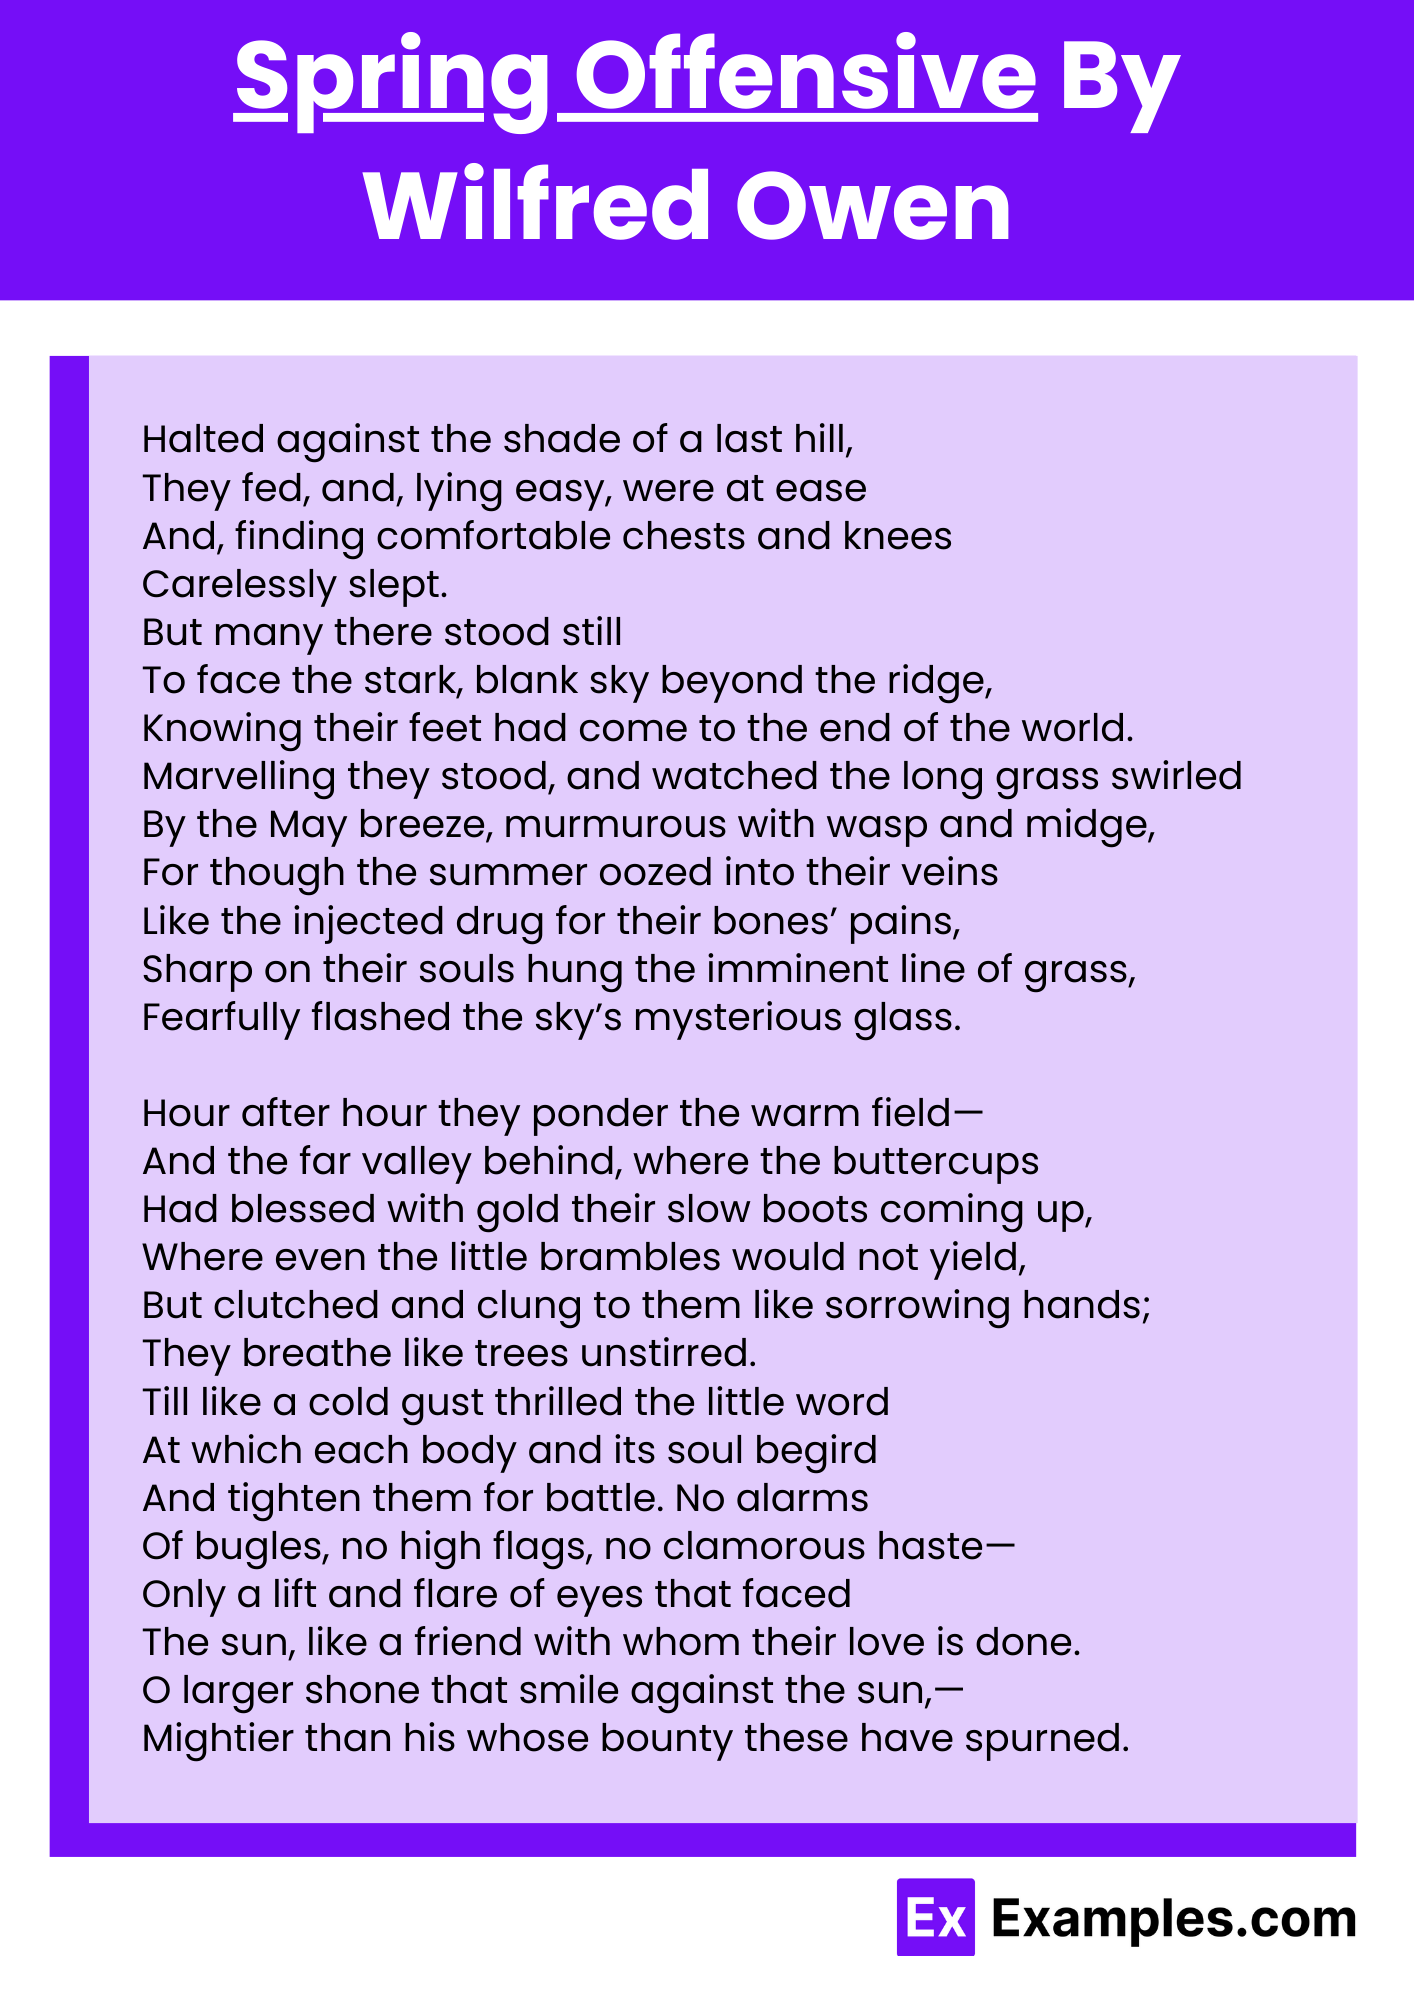 Spring Offensive By Wilfred Owen